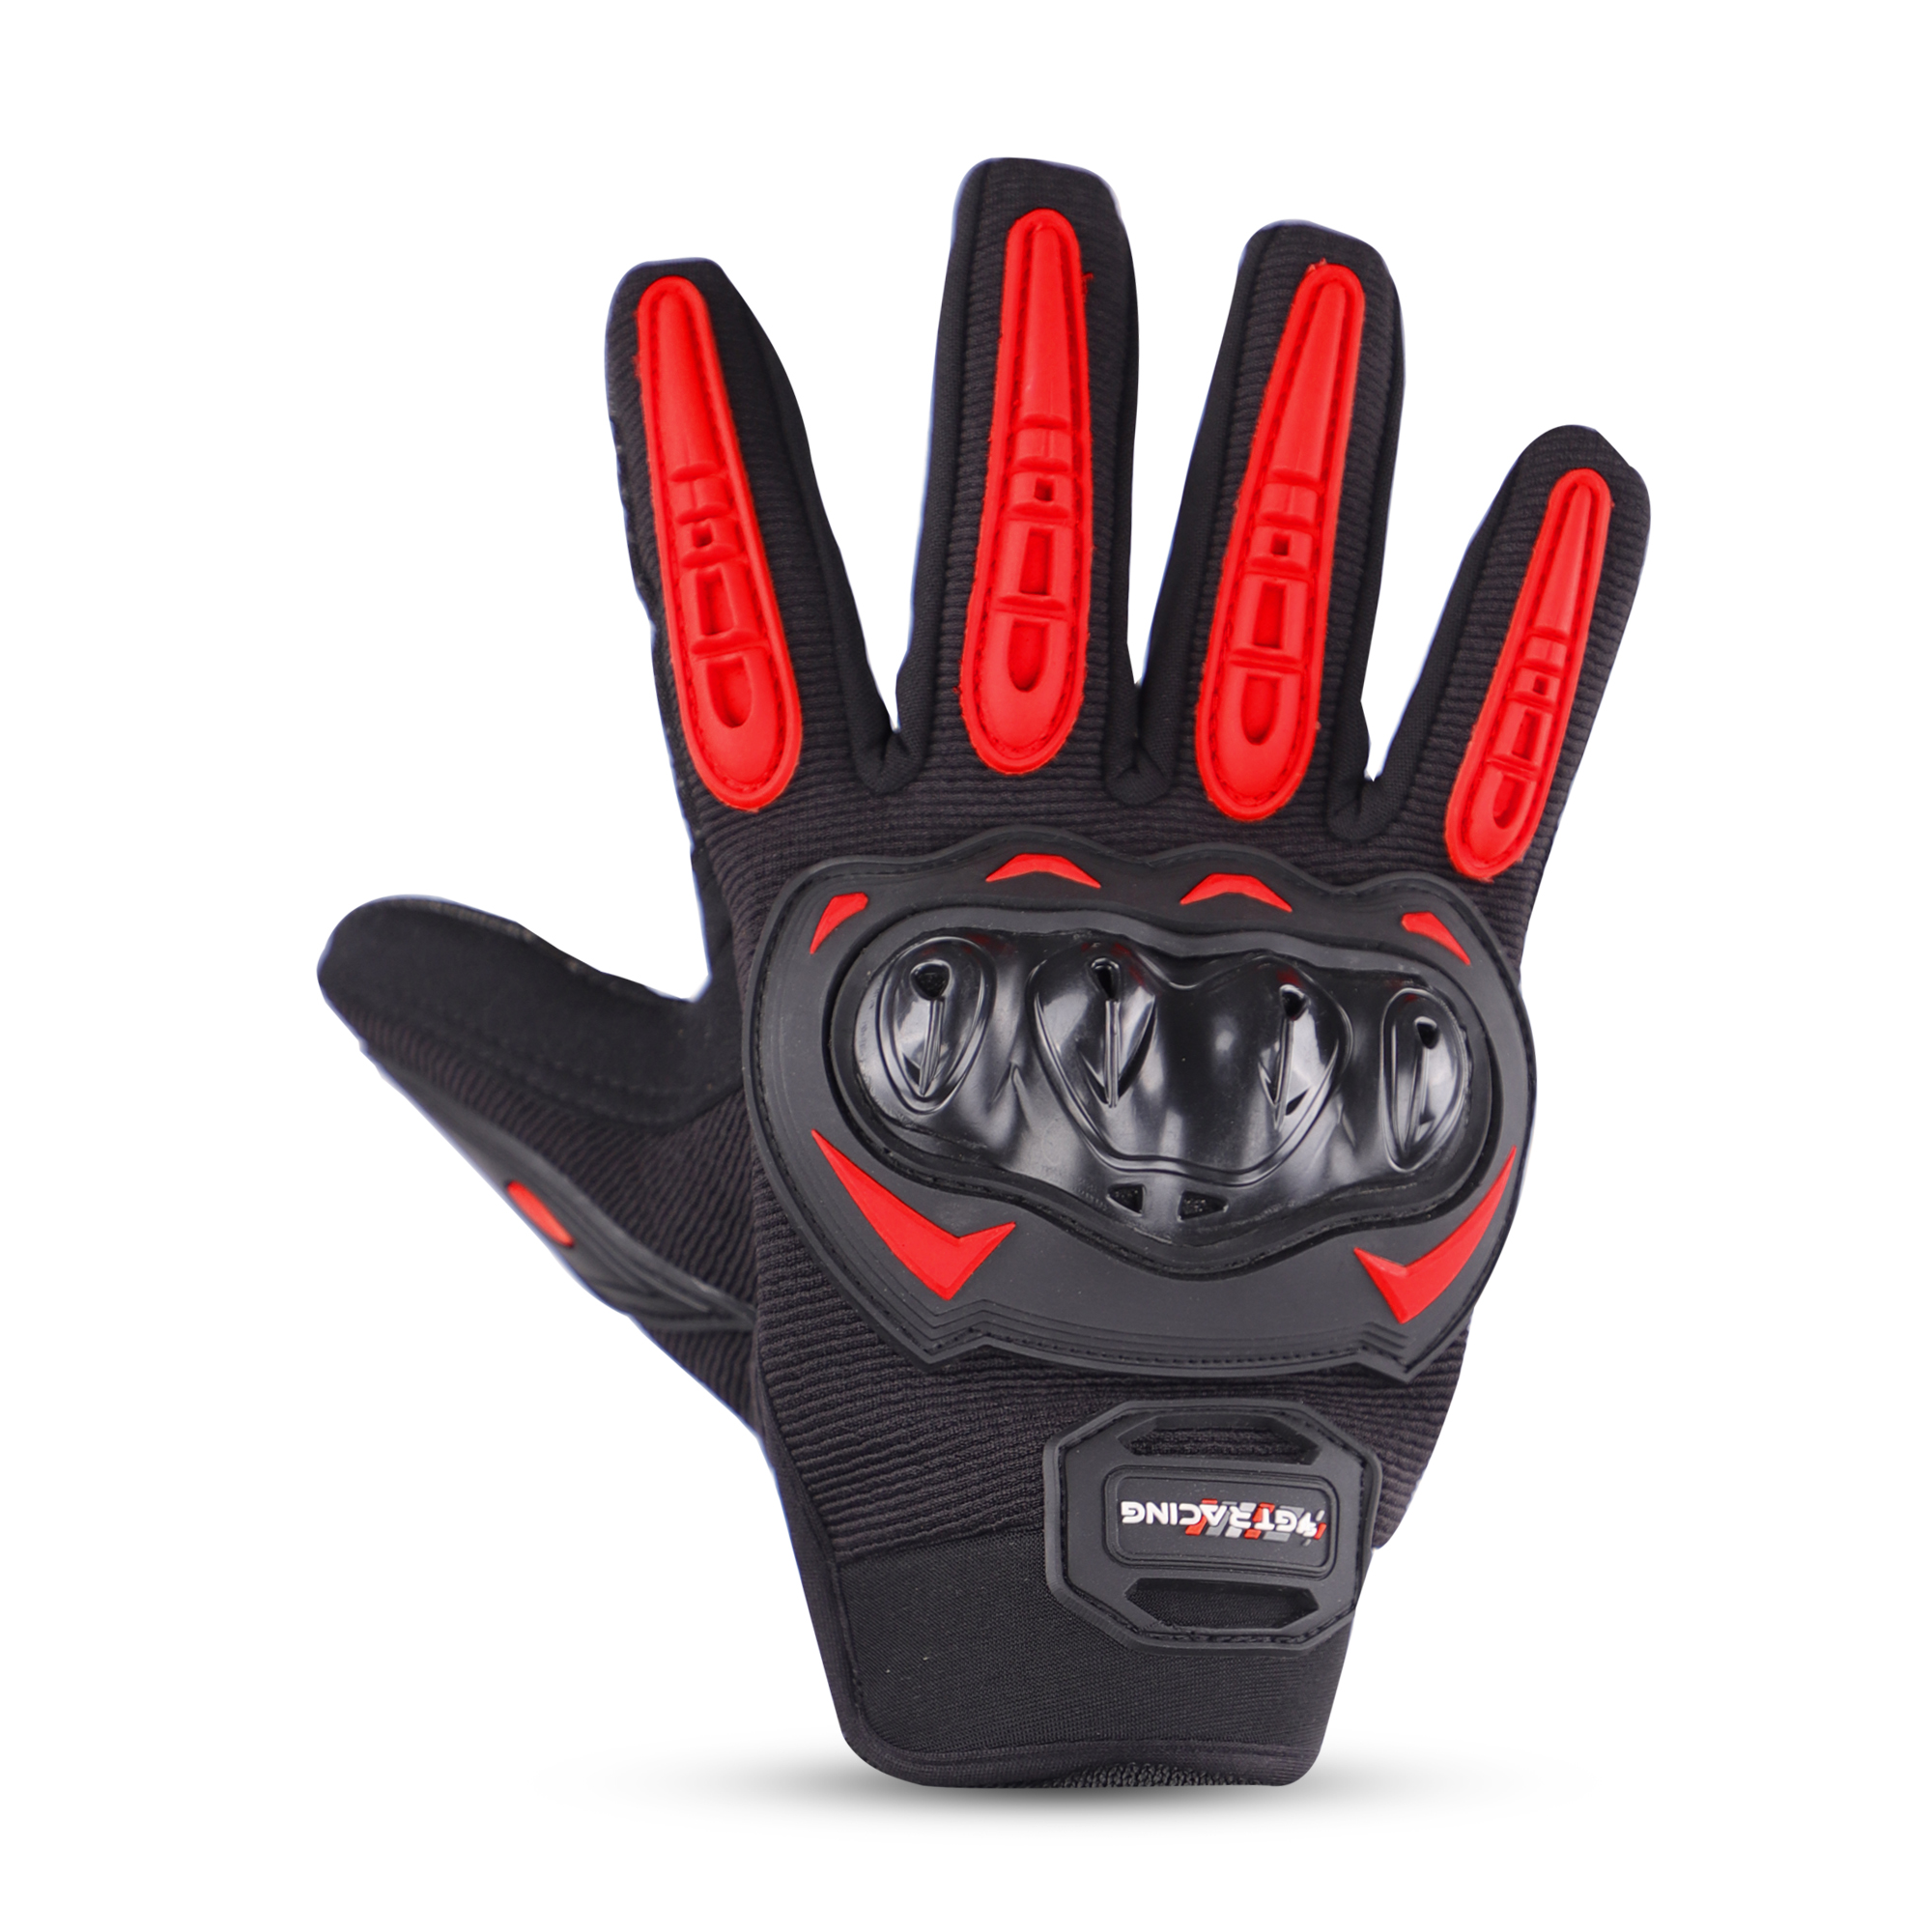 Steelbird GT-17 Full Finger Bike Riding Gloves with Touch Screen Sensitivity at Thumb and Index Finger, Protective Off-Road Motorbike Racing (Red)